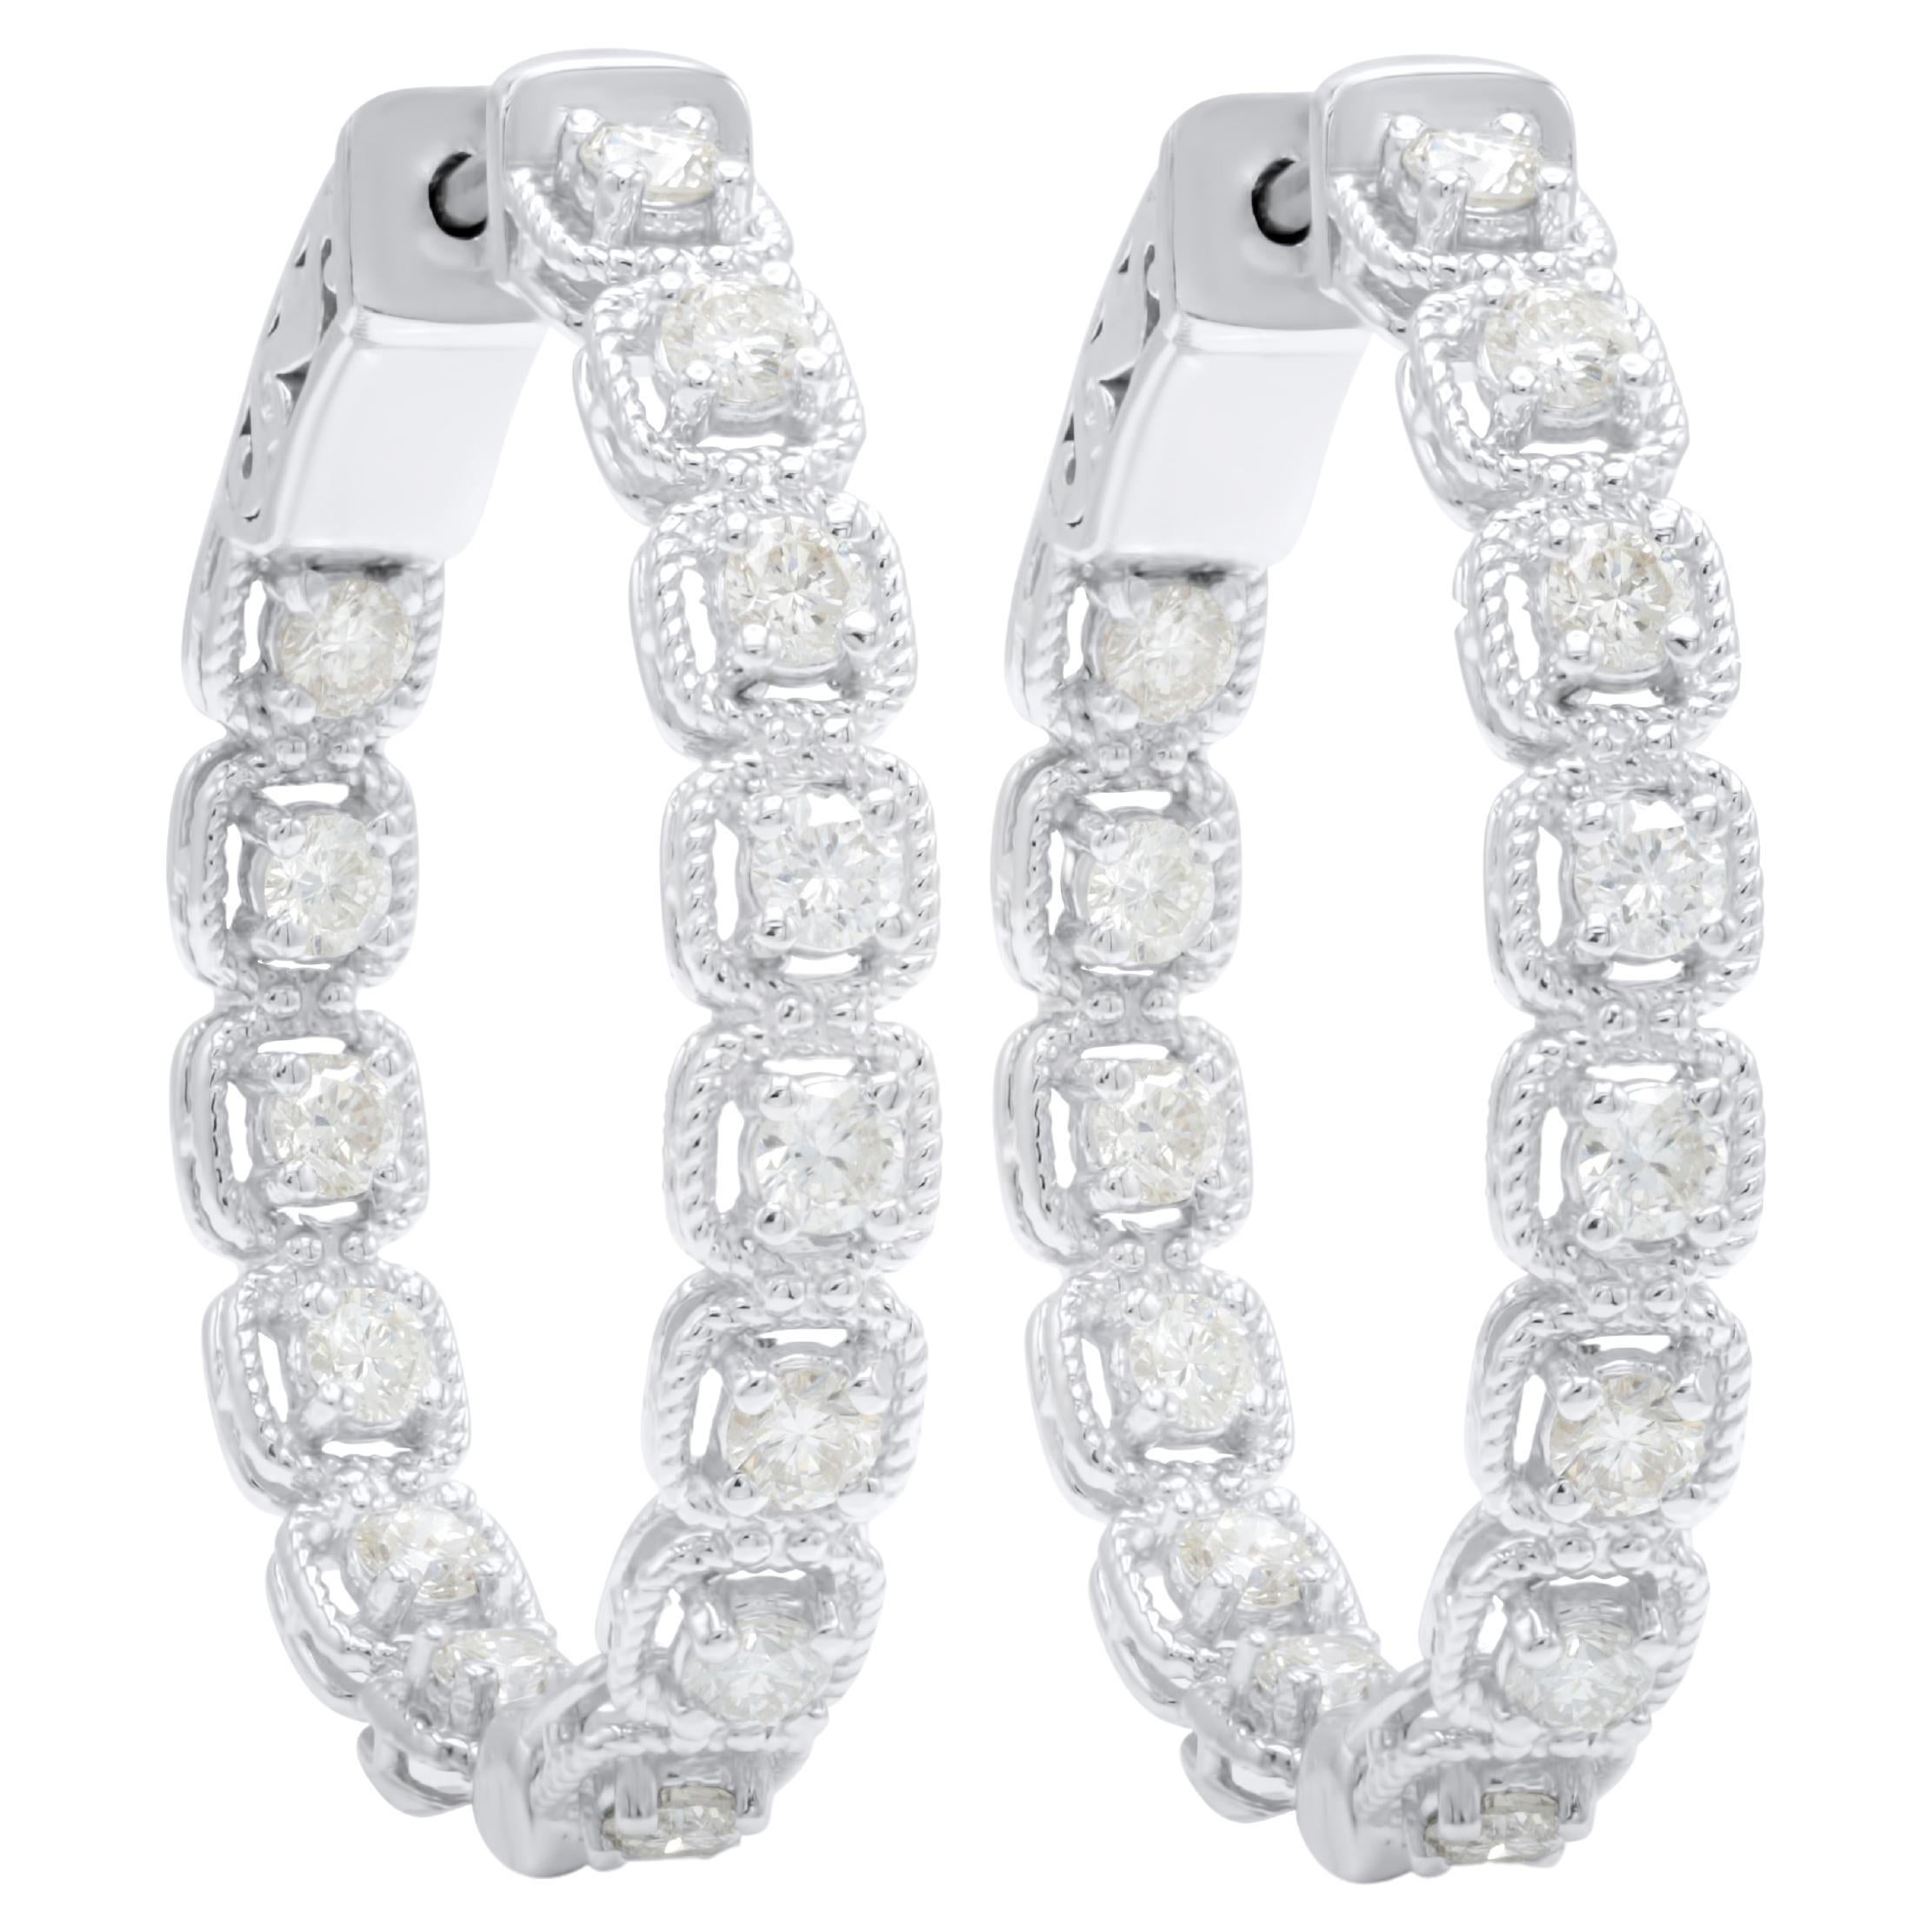 Diana M. 14 kt white gold, 1" earrings featuring 2.00 cts tw diamonds